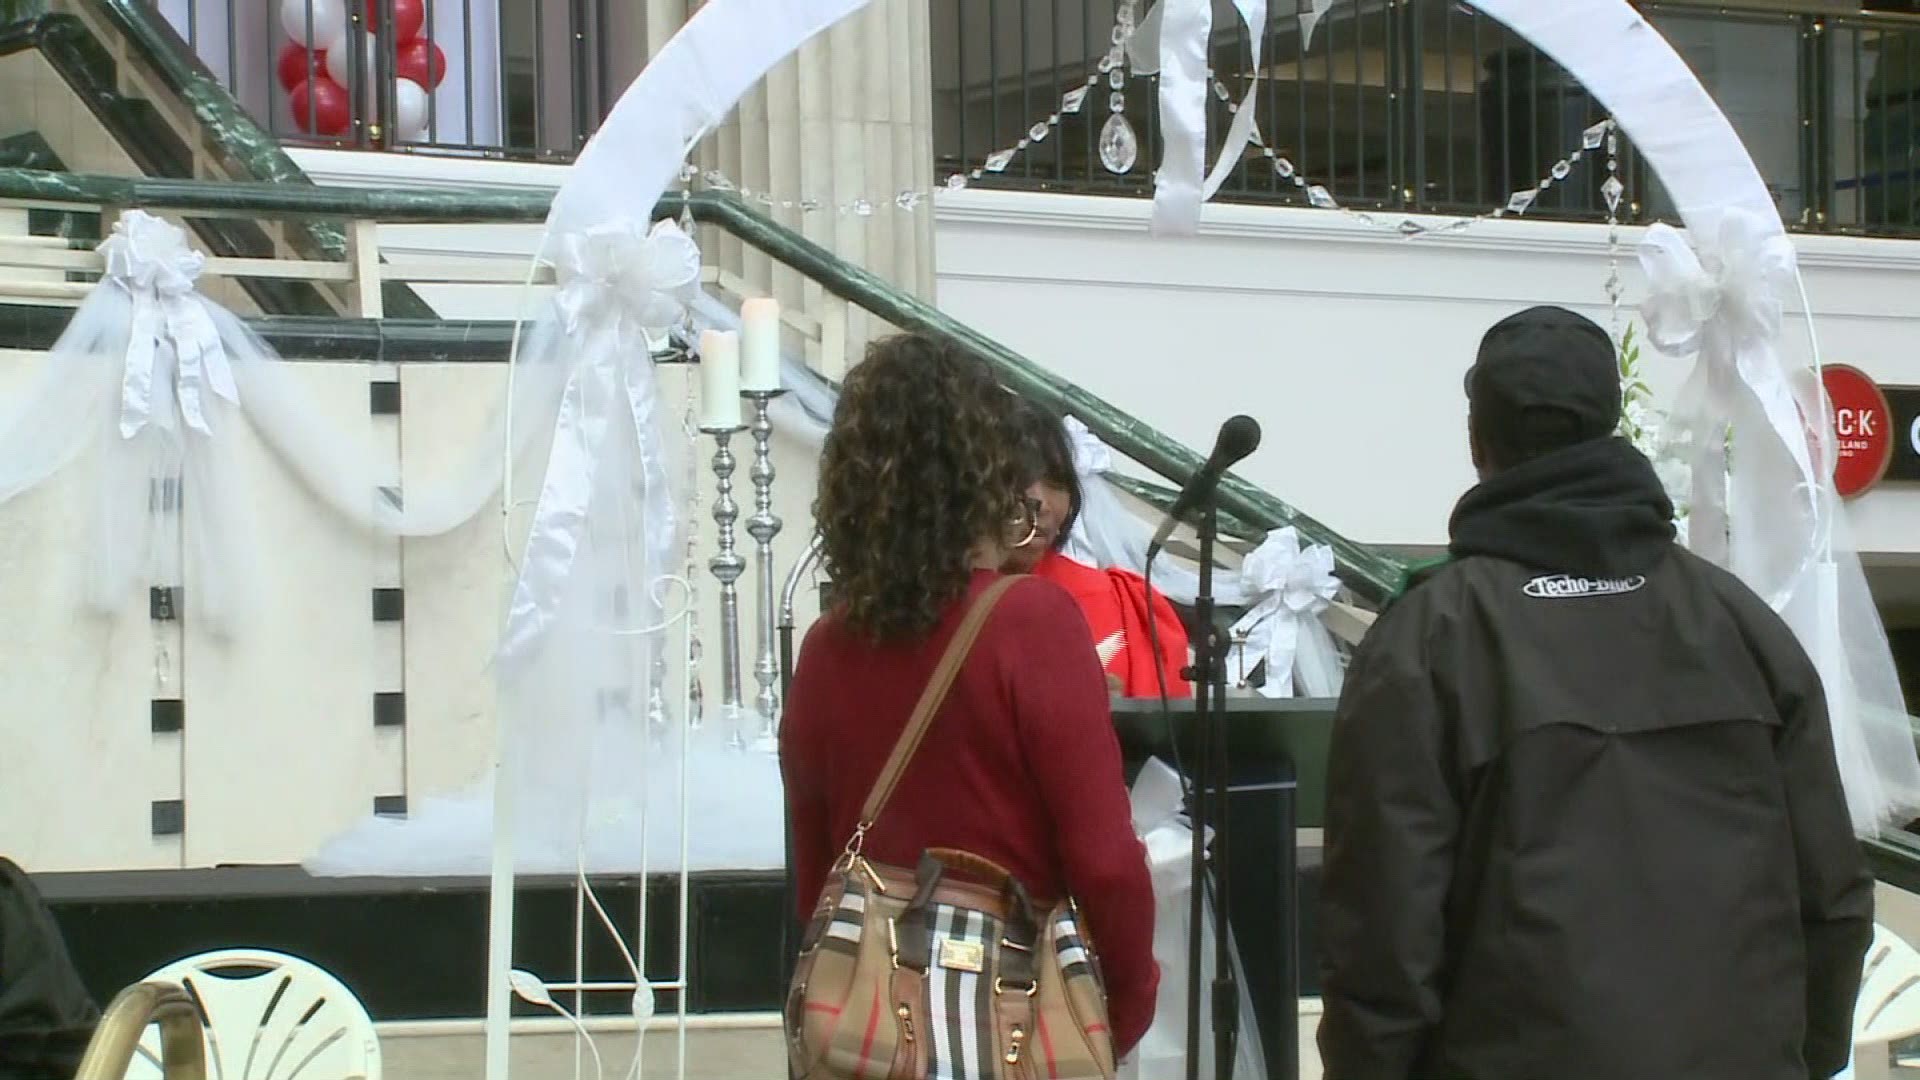 Several couples celebrated Valentine's Day by saying "I do" at Cleveland's Tower City.